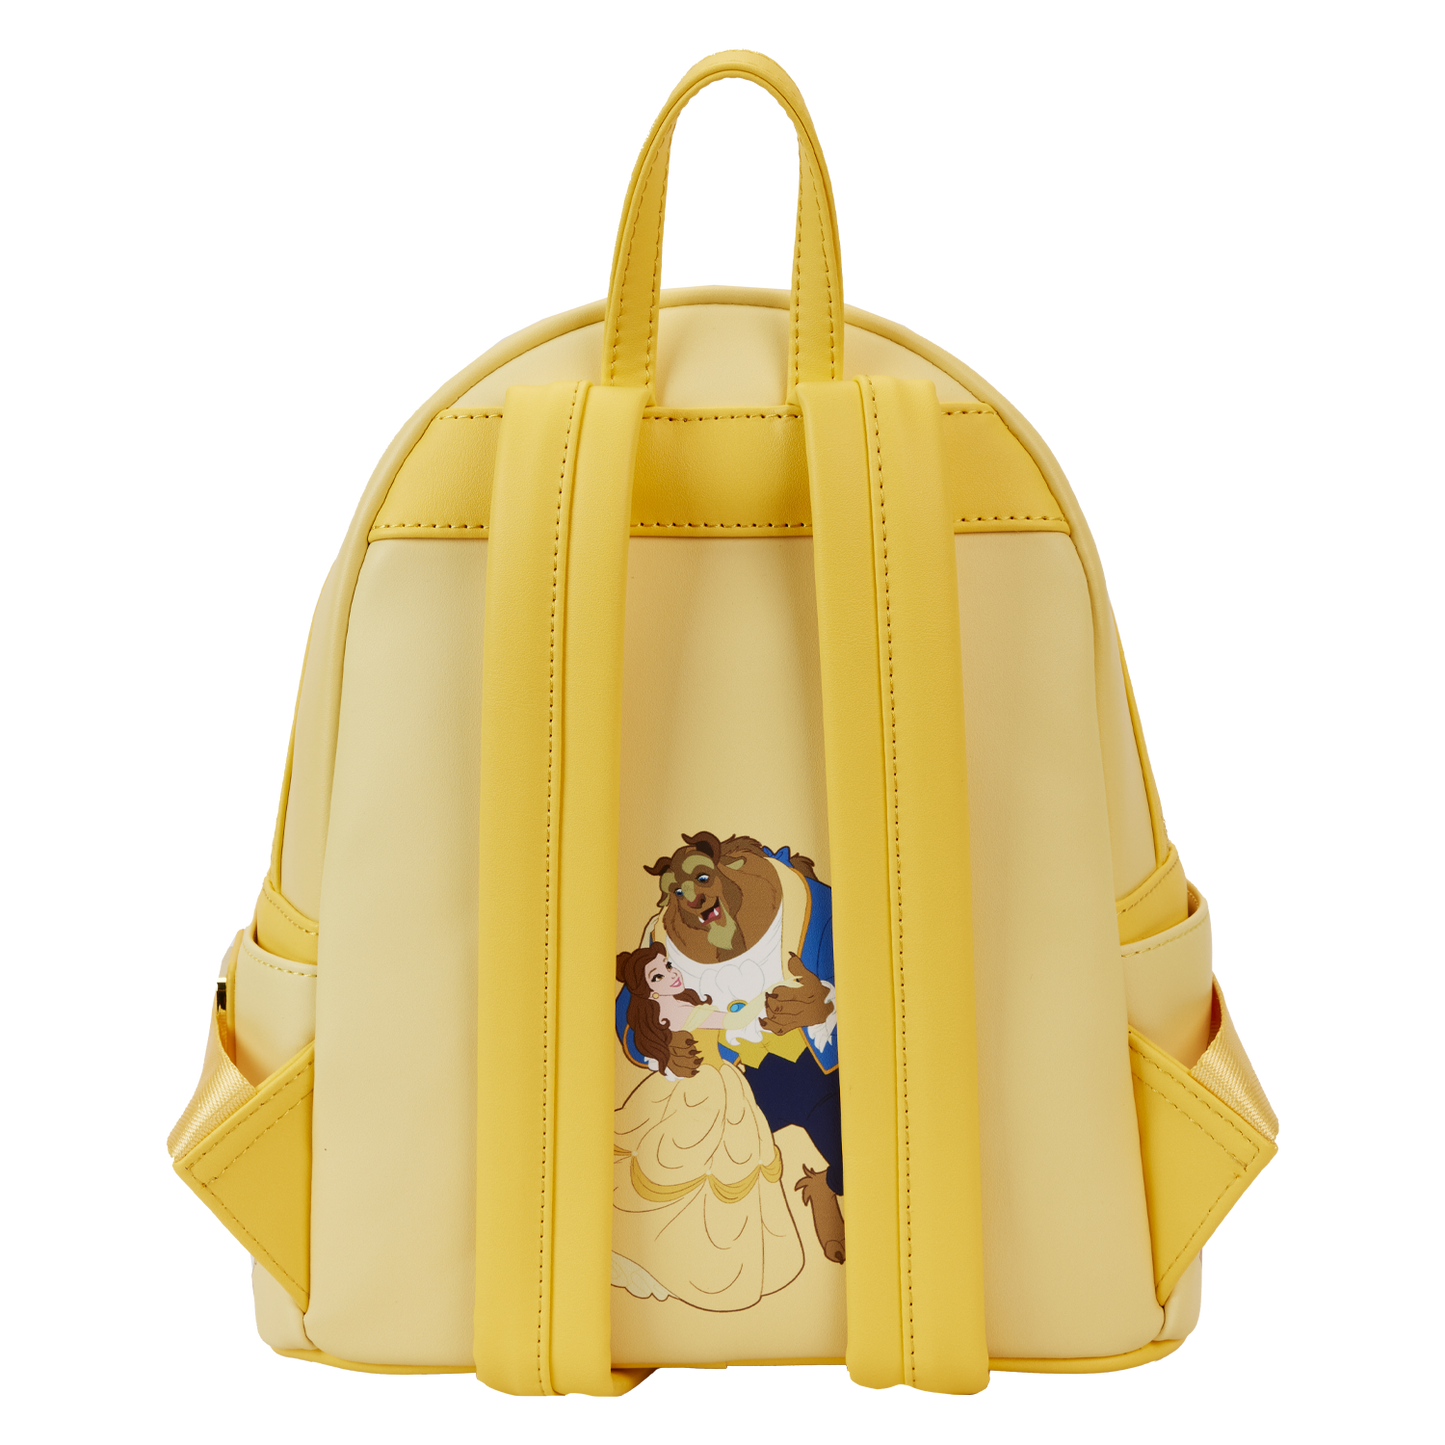 Disney Beauty and the Beast Belle Lenticular Mini Backpack